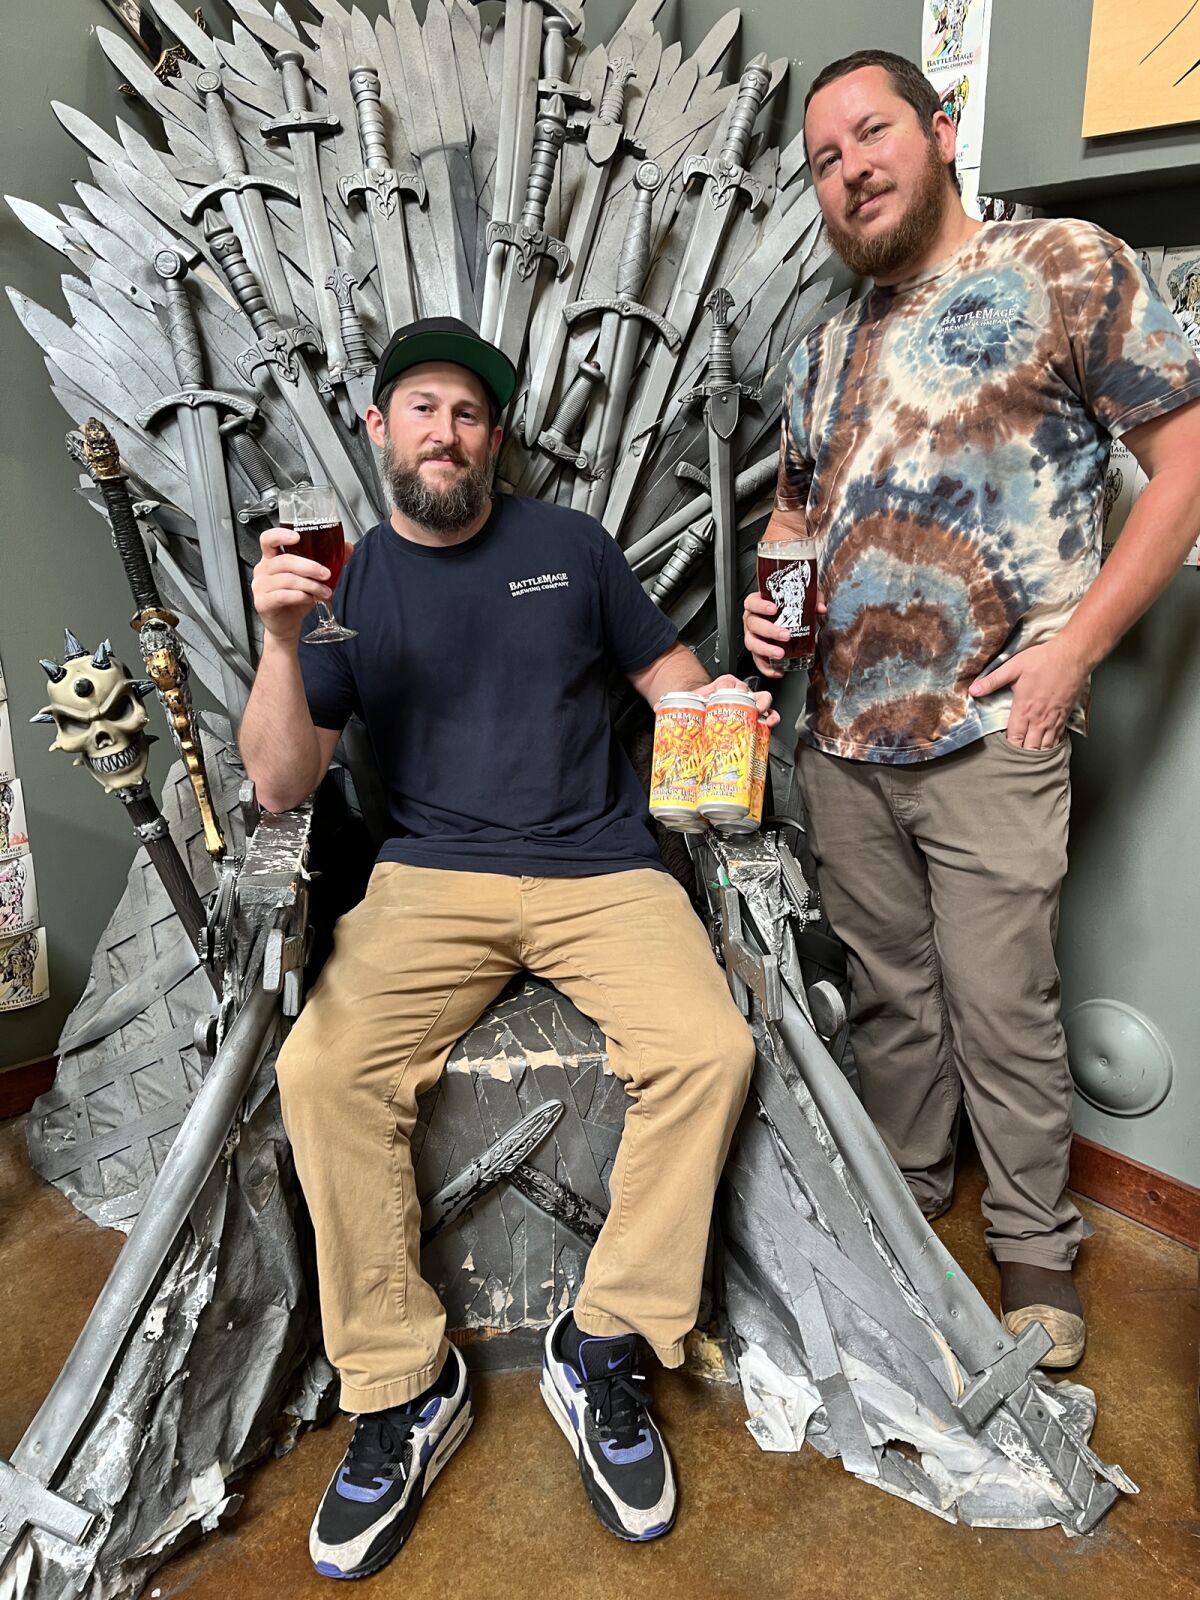 BattleMage Brewing co-founders Chris Barry, seated, and Ryan Sather, with their Summon Ifrit Hoppy Amber beer.